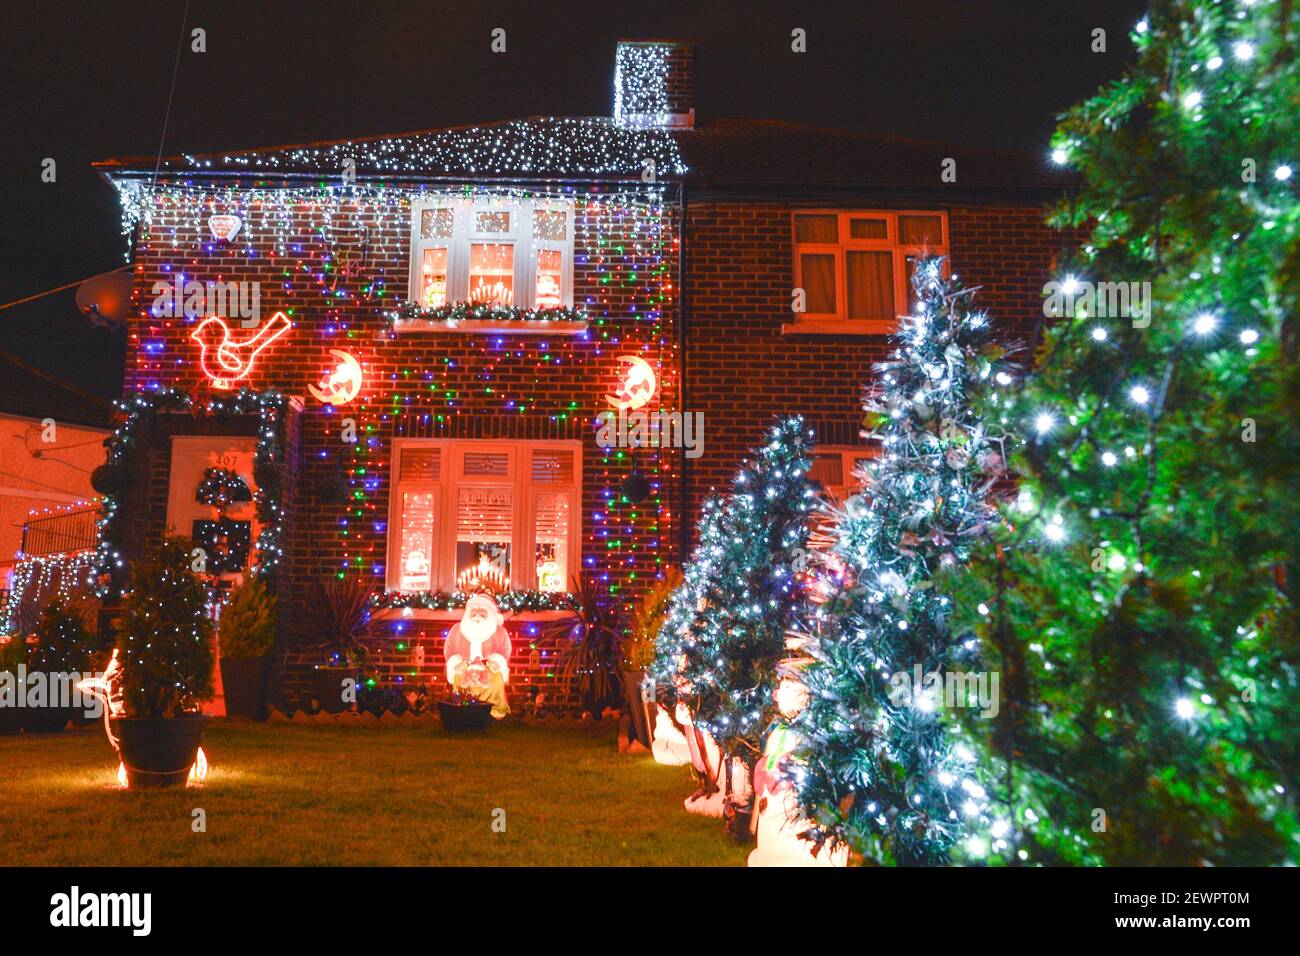 Christmas lights and decorations at a house in Crumlin, Dublin. On ...